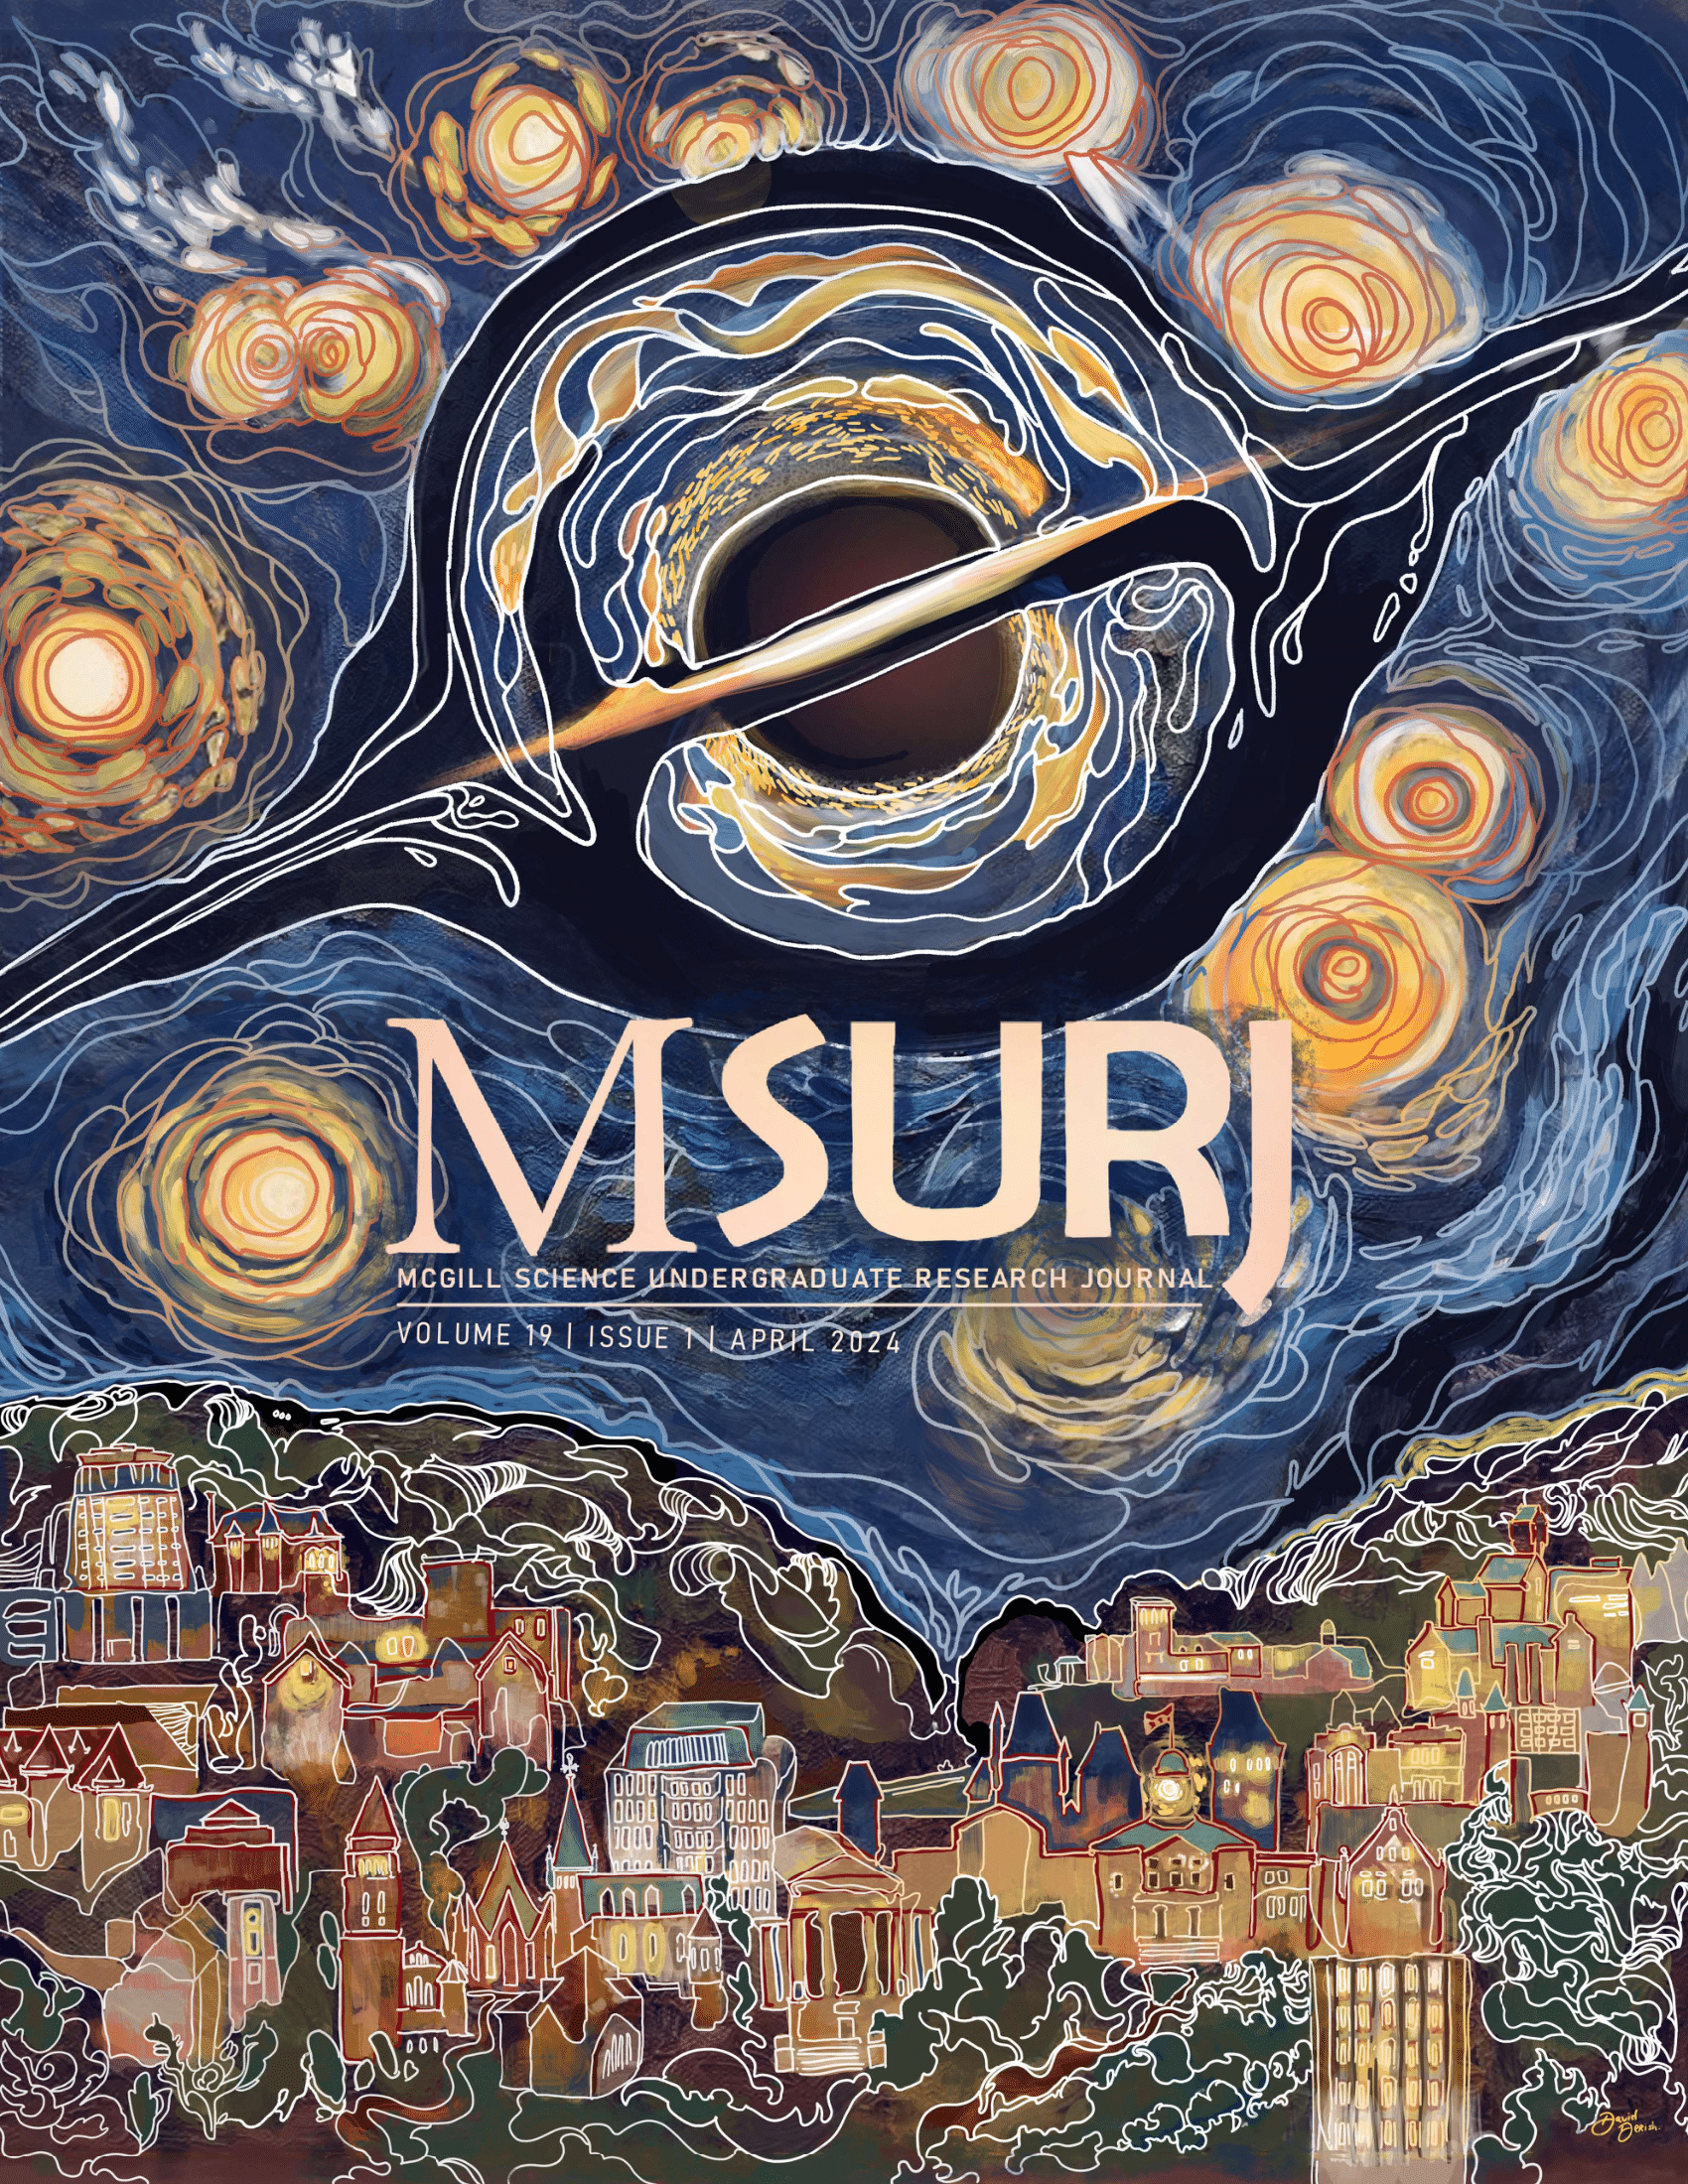 The painting on the cover, created using mixed media — oil and digital — depicts this journal’s home campus of McGill University at the foot of Montréal’s Mount Royal. The city-scape, illuminated by the blinding accretion disc of a black hole in the night sky, brings these elusive and distant bodies within reach of scientific and creative minds alike.